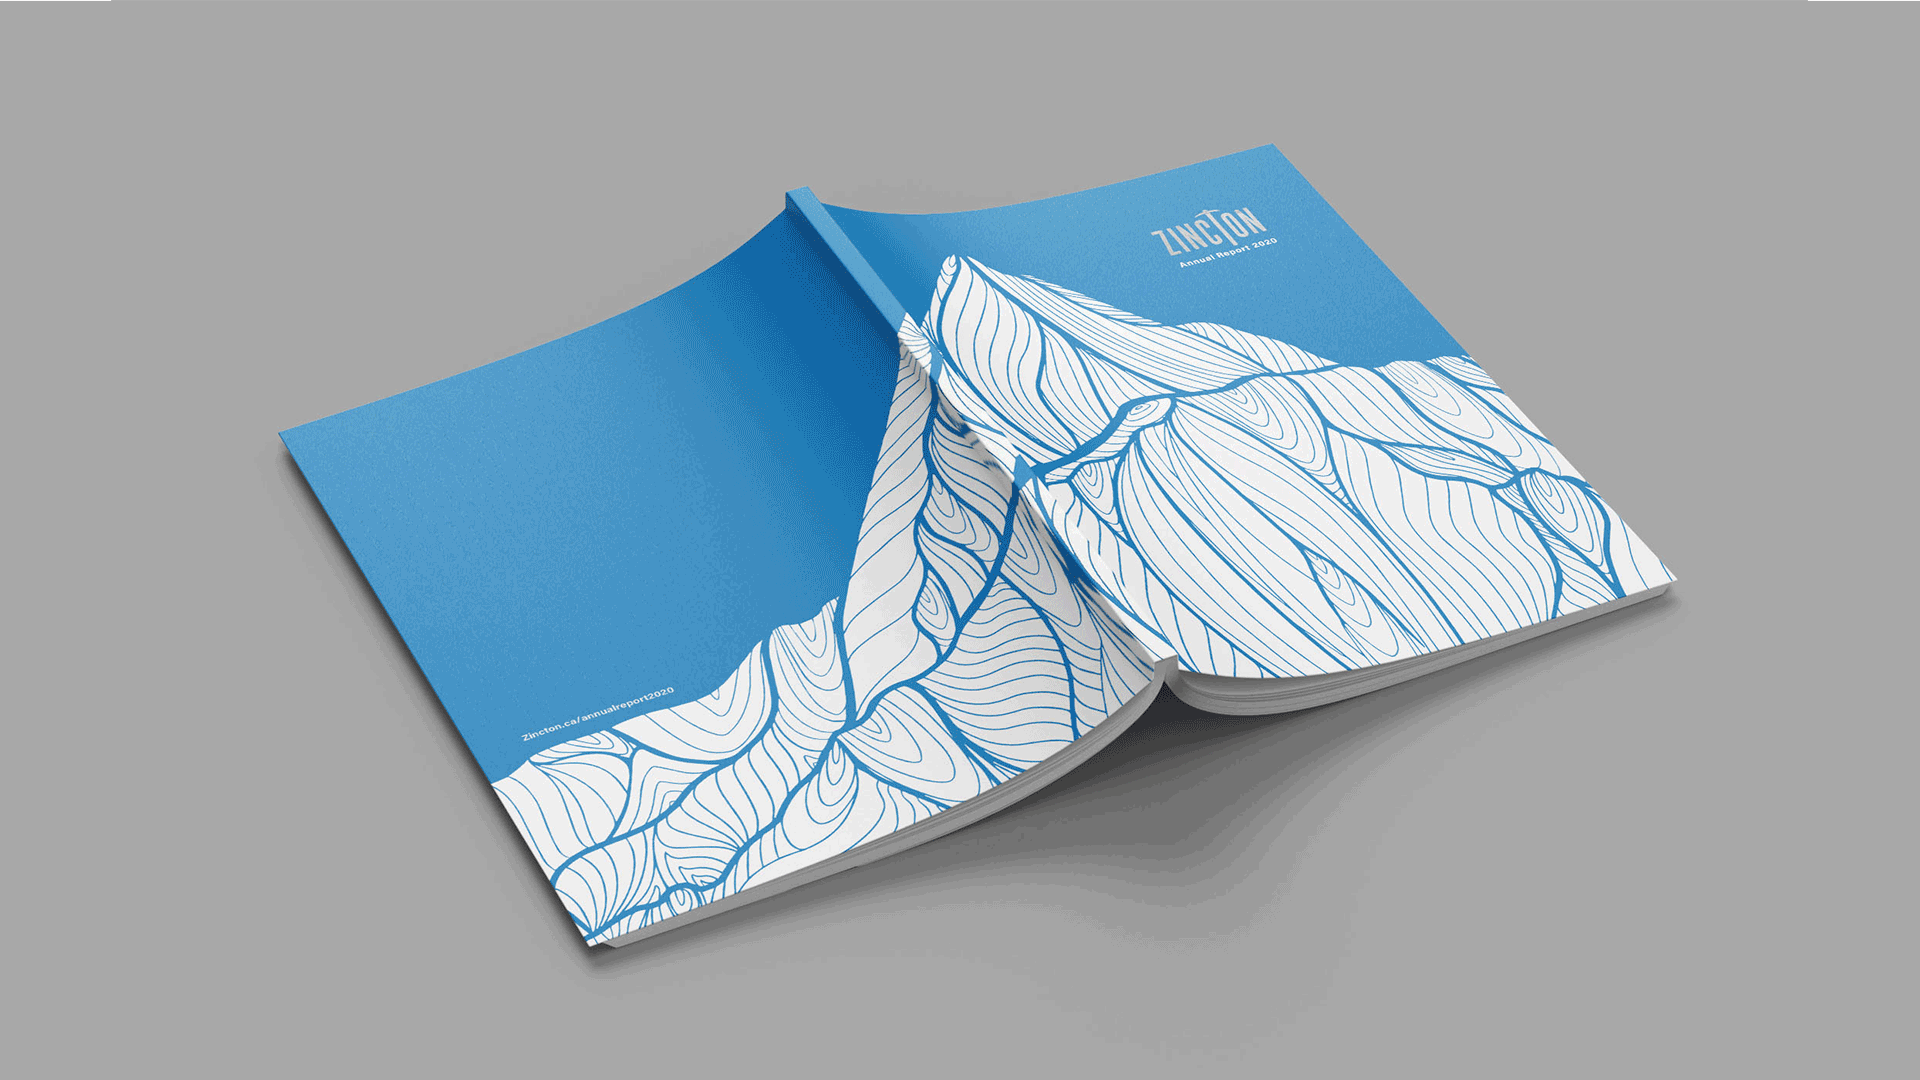 GIF of an annual report book with a mountains-scape across the cover, flipping through the pages to showcase the layout and design.